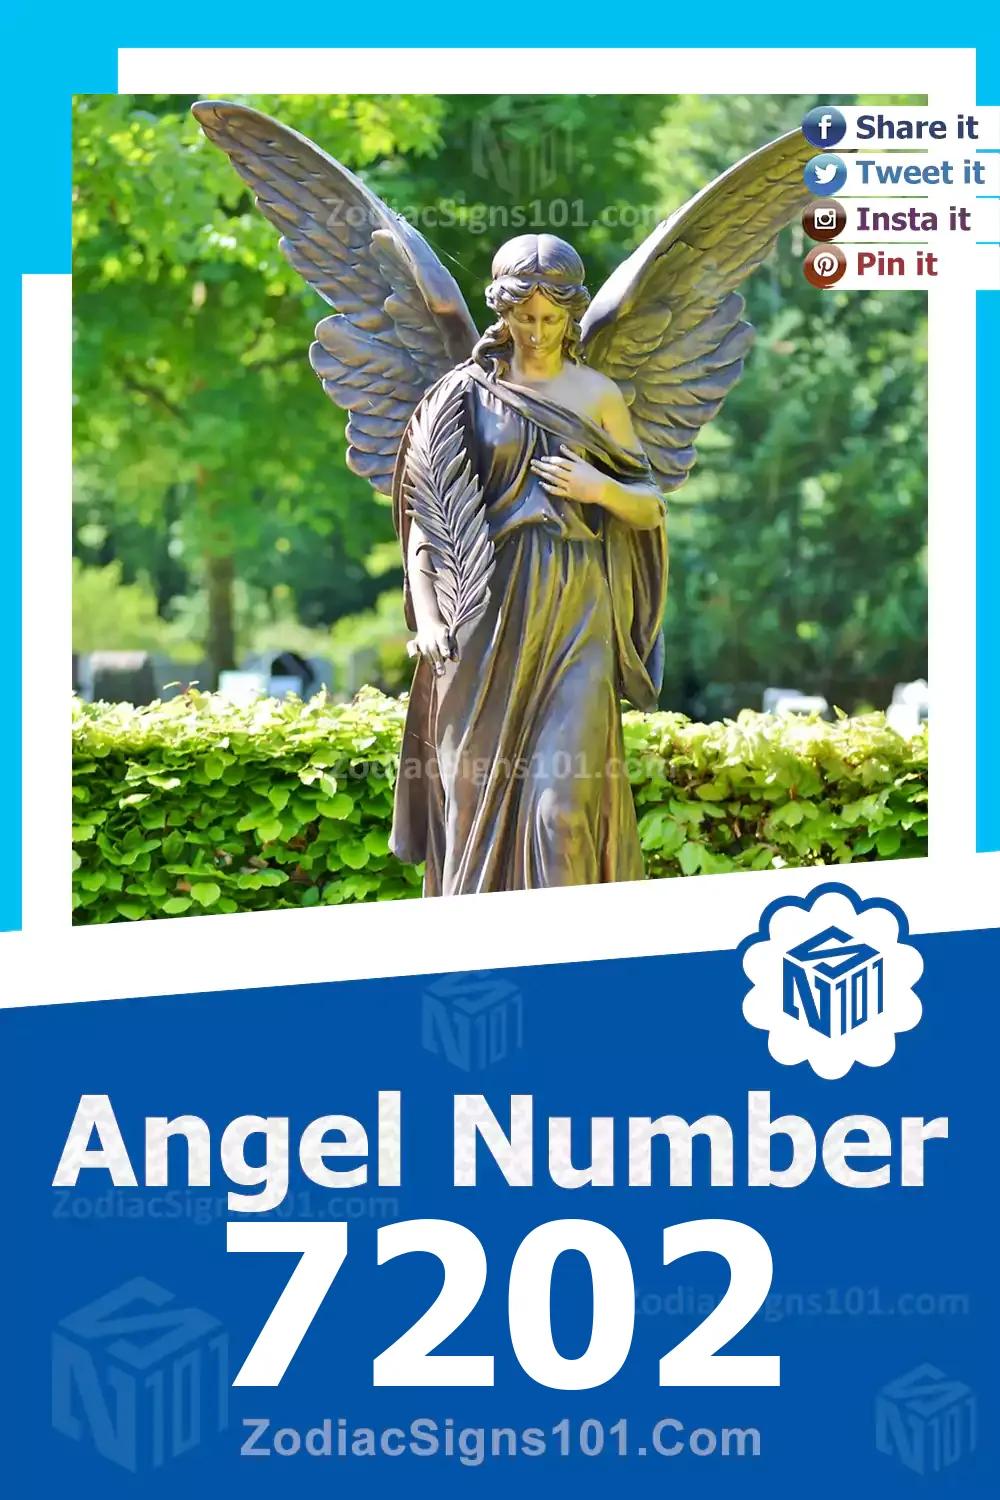 7202 Angel Number Meaning